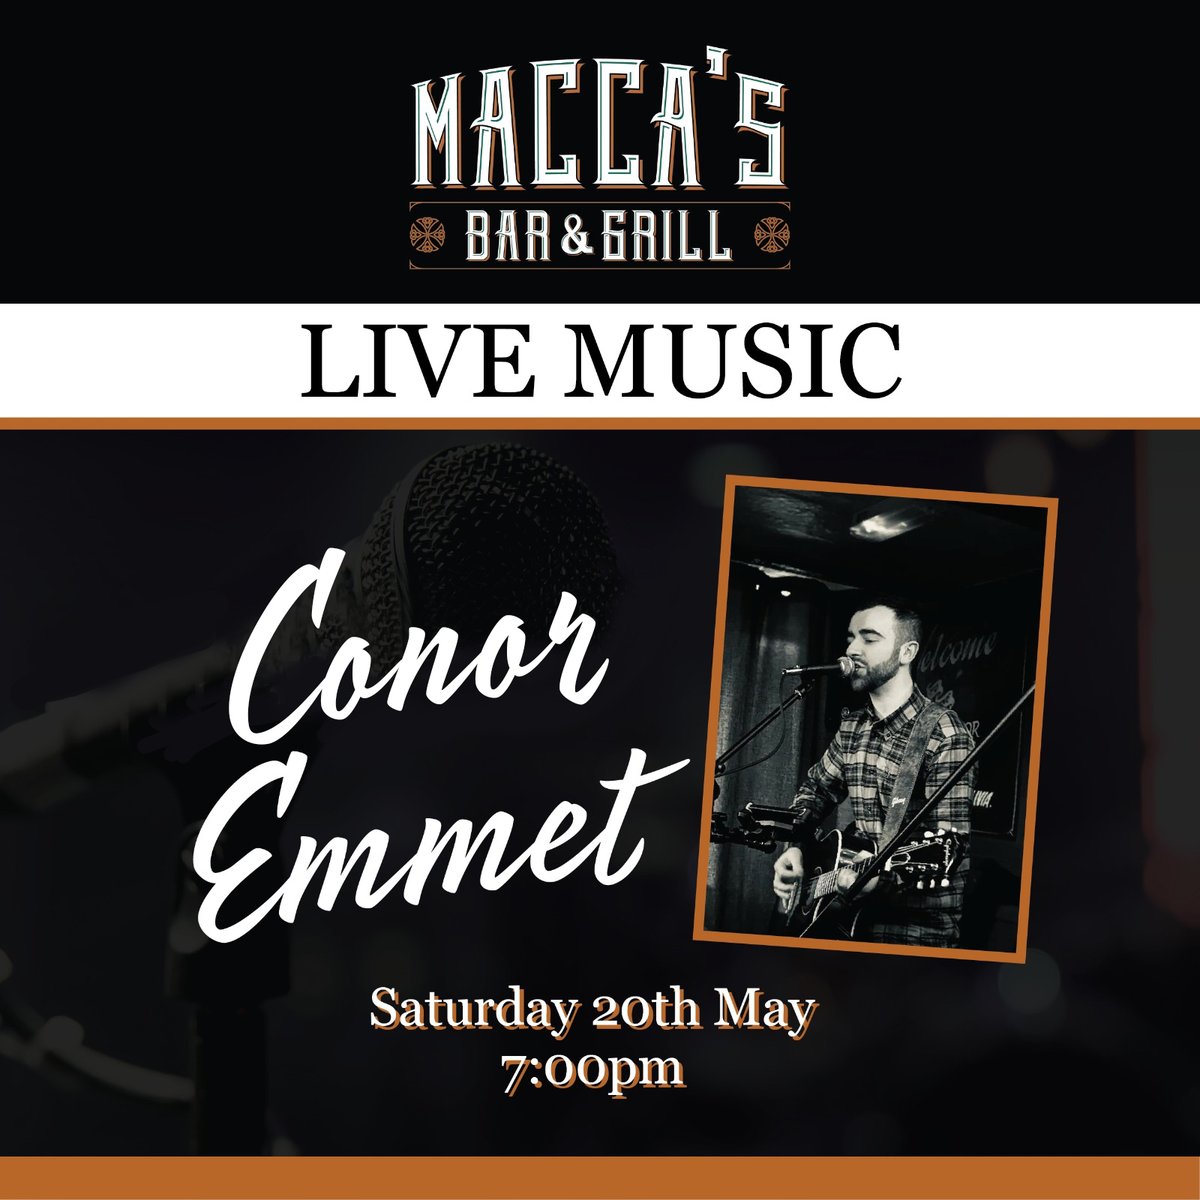 Tonight at 7:00pm we see the return of the fantastic Conor Emmet… he raised the roof in March and he’s back to repeat the job in style! 🎸 🎤 #livemusic #guinness #irishbar #prestwich #GuinnessTime #prestwichvillage